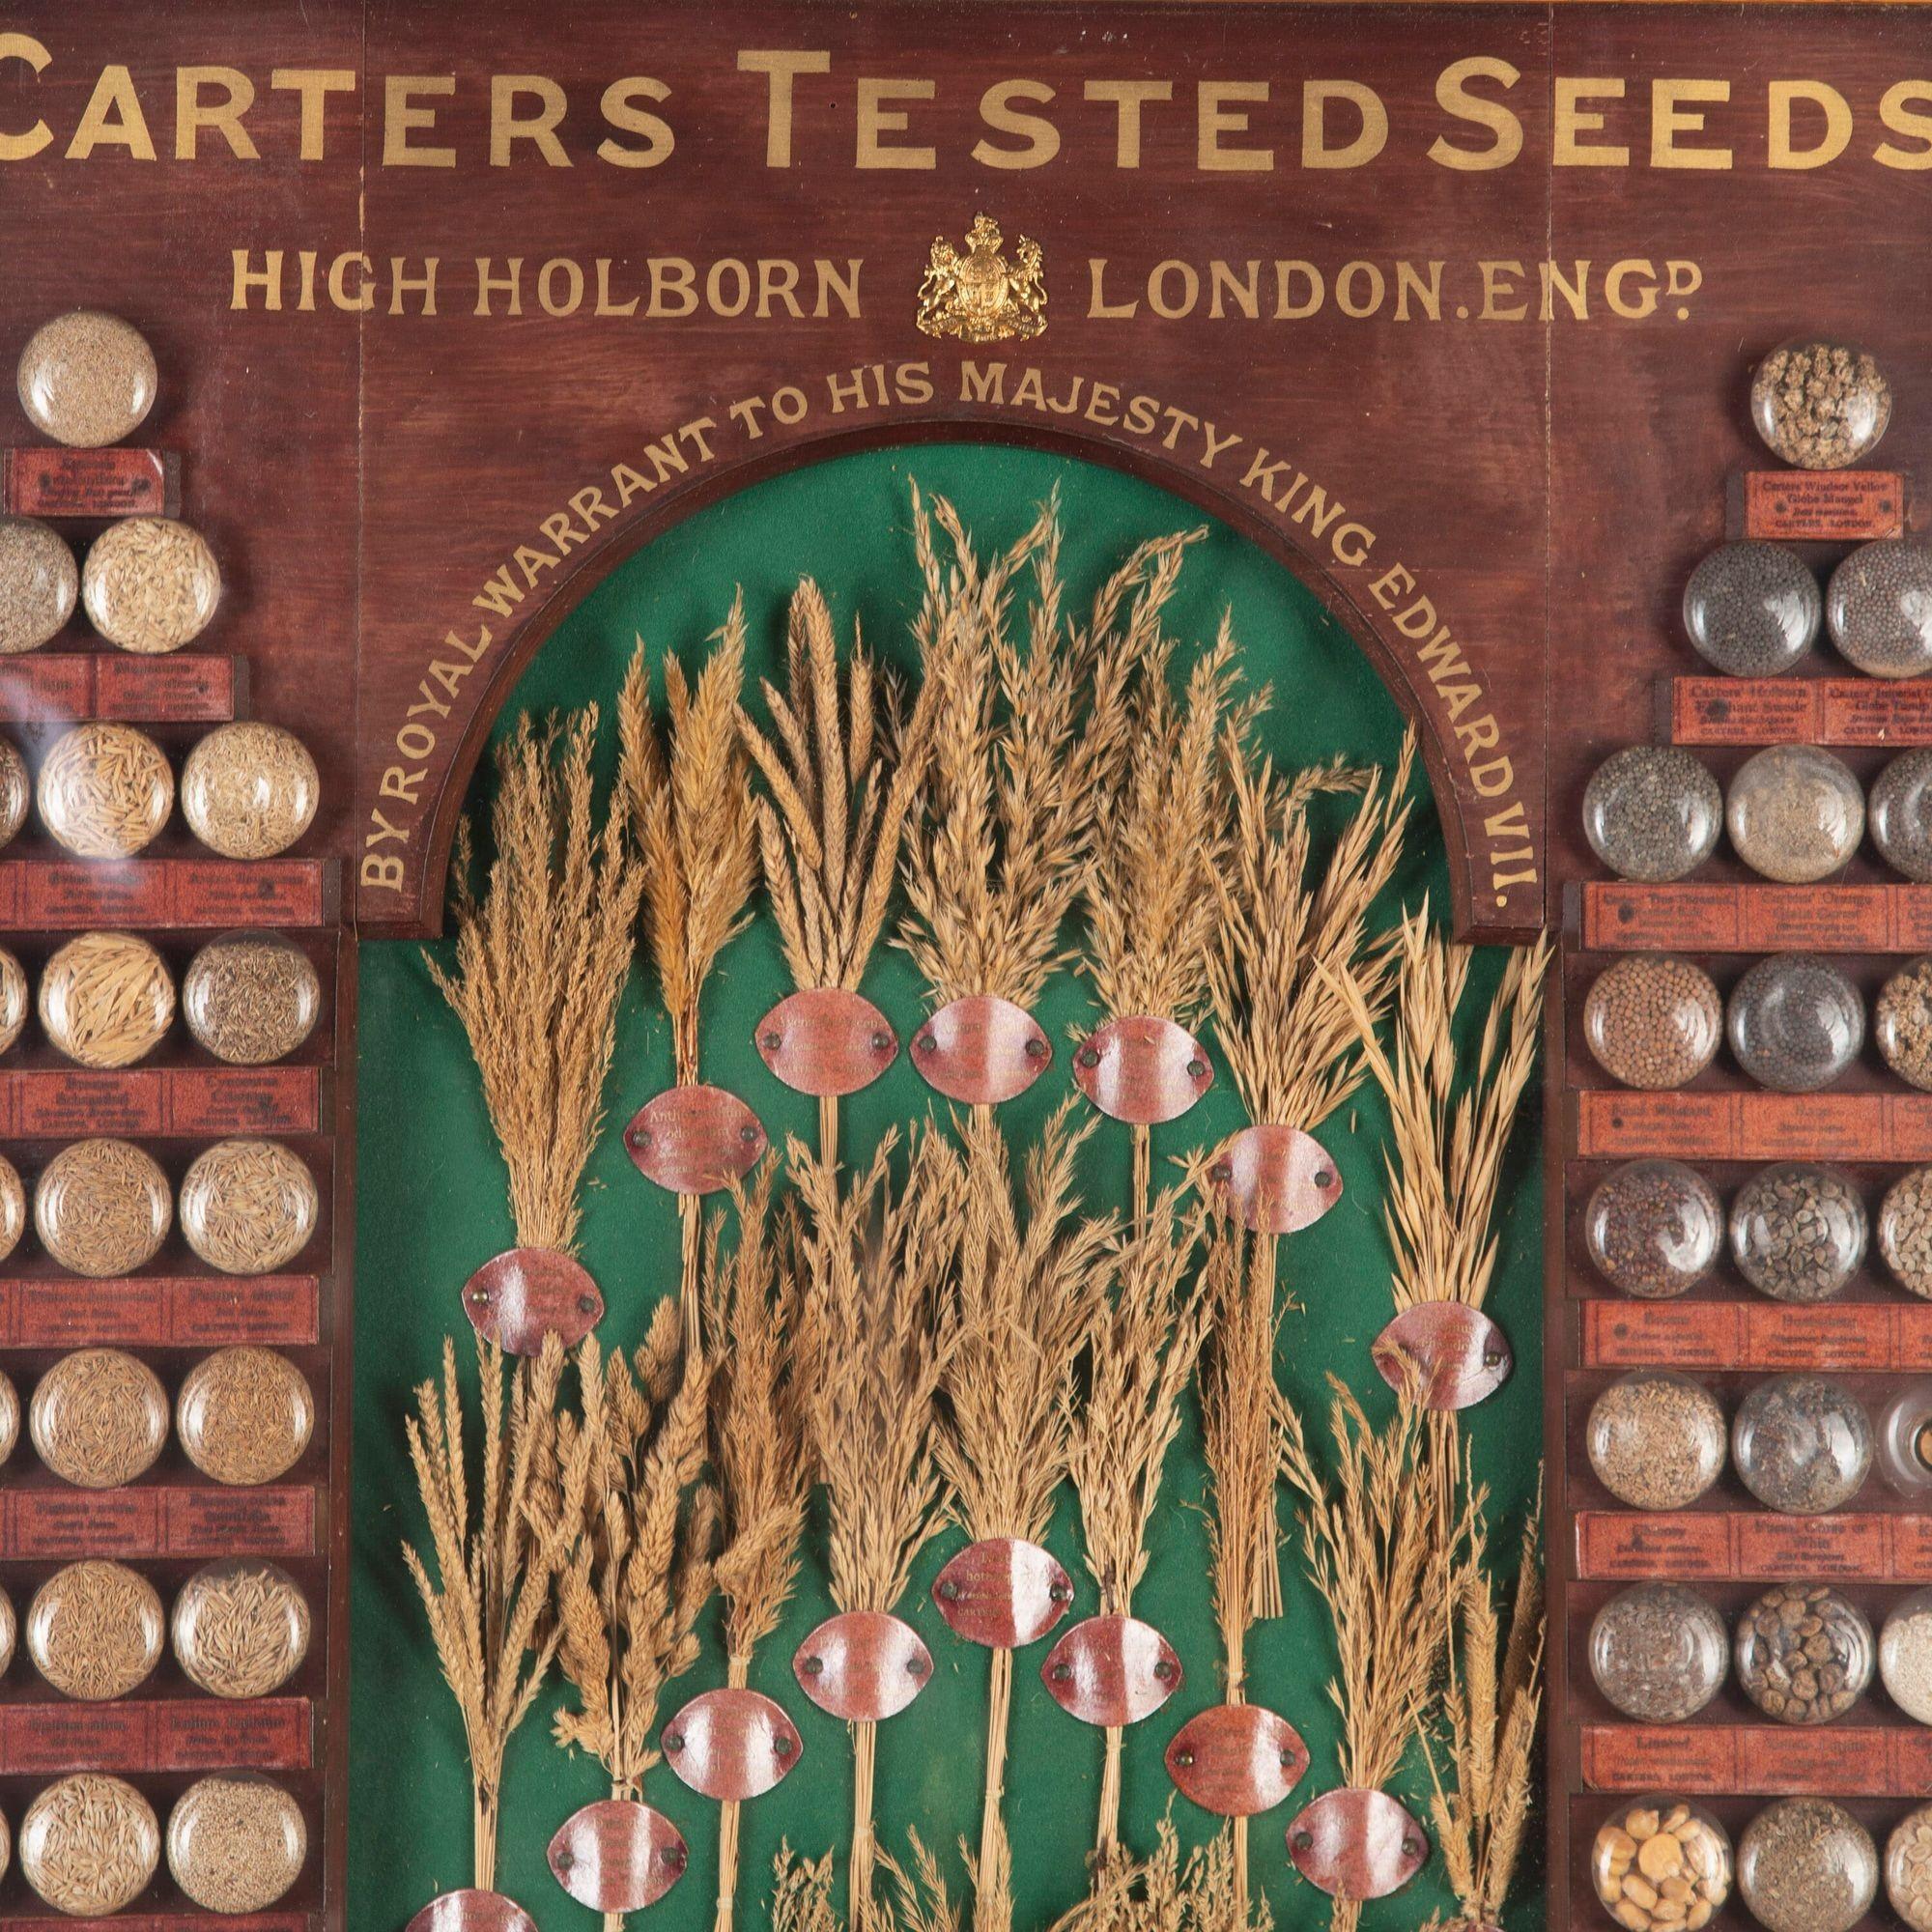 Wood 19th Century Carter Tested Seed Wall Display For Sale